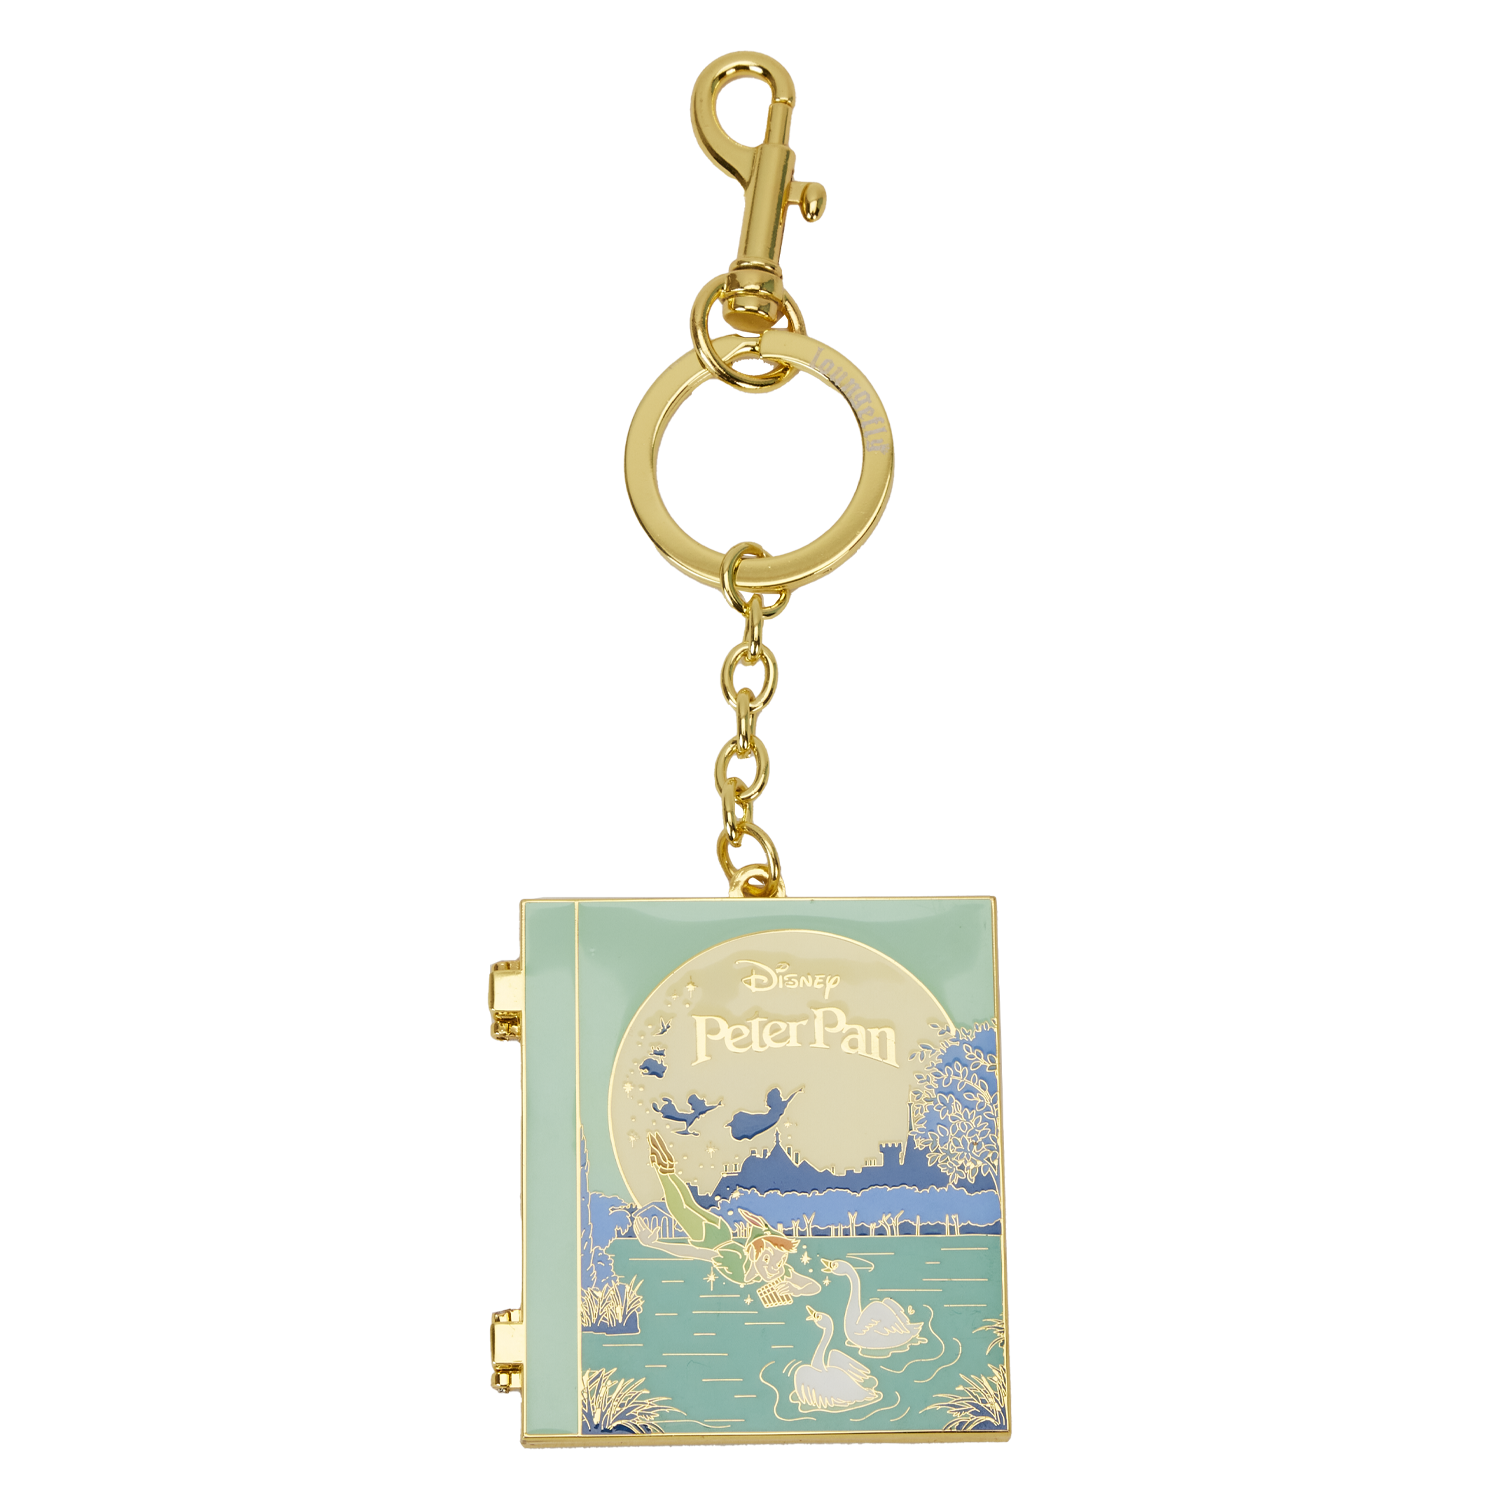 Buy Peter Pan You Can Fly Storybook Keychain at Loungefly.